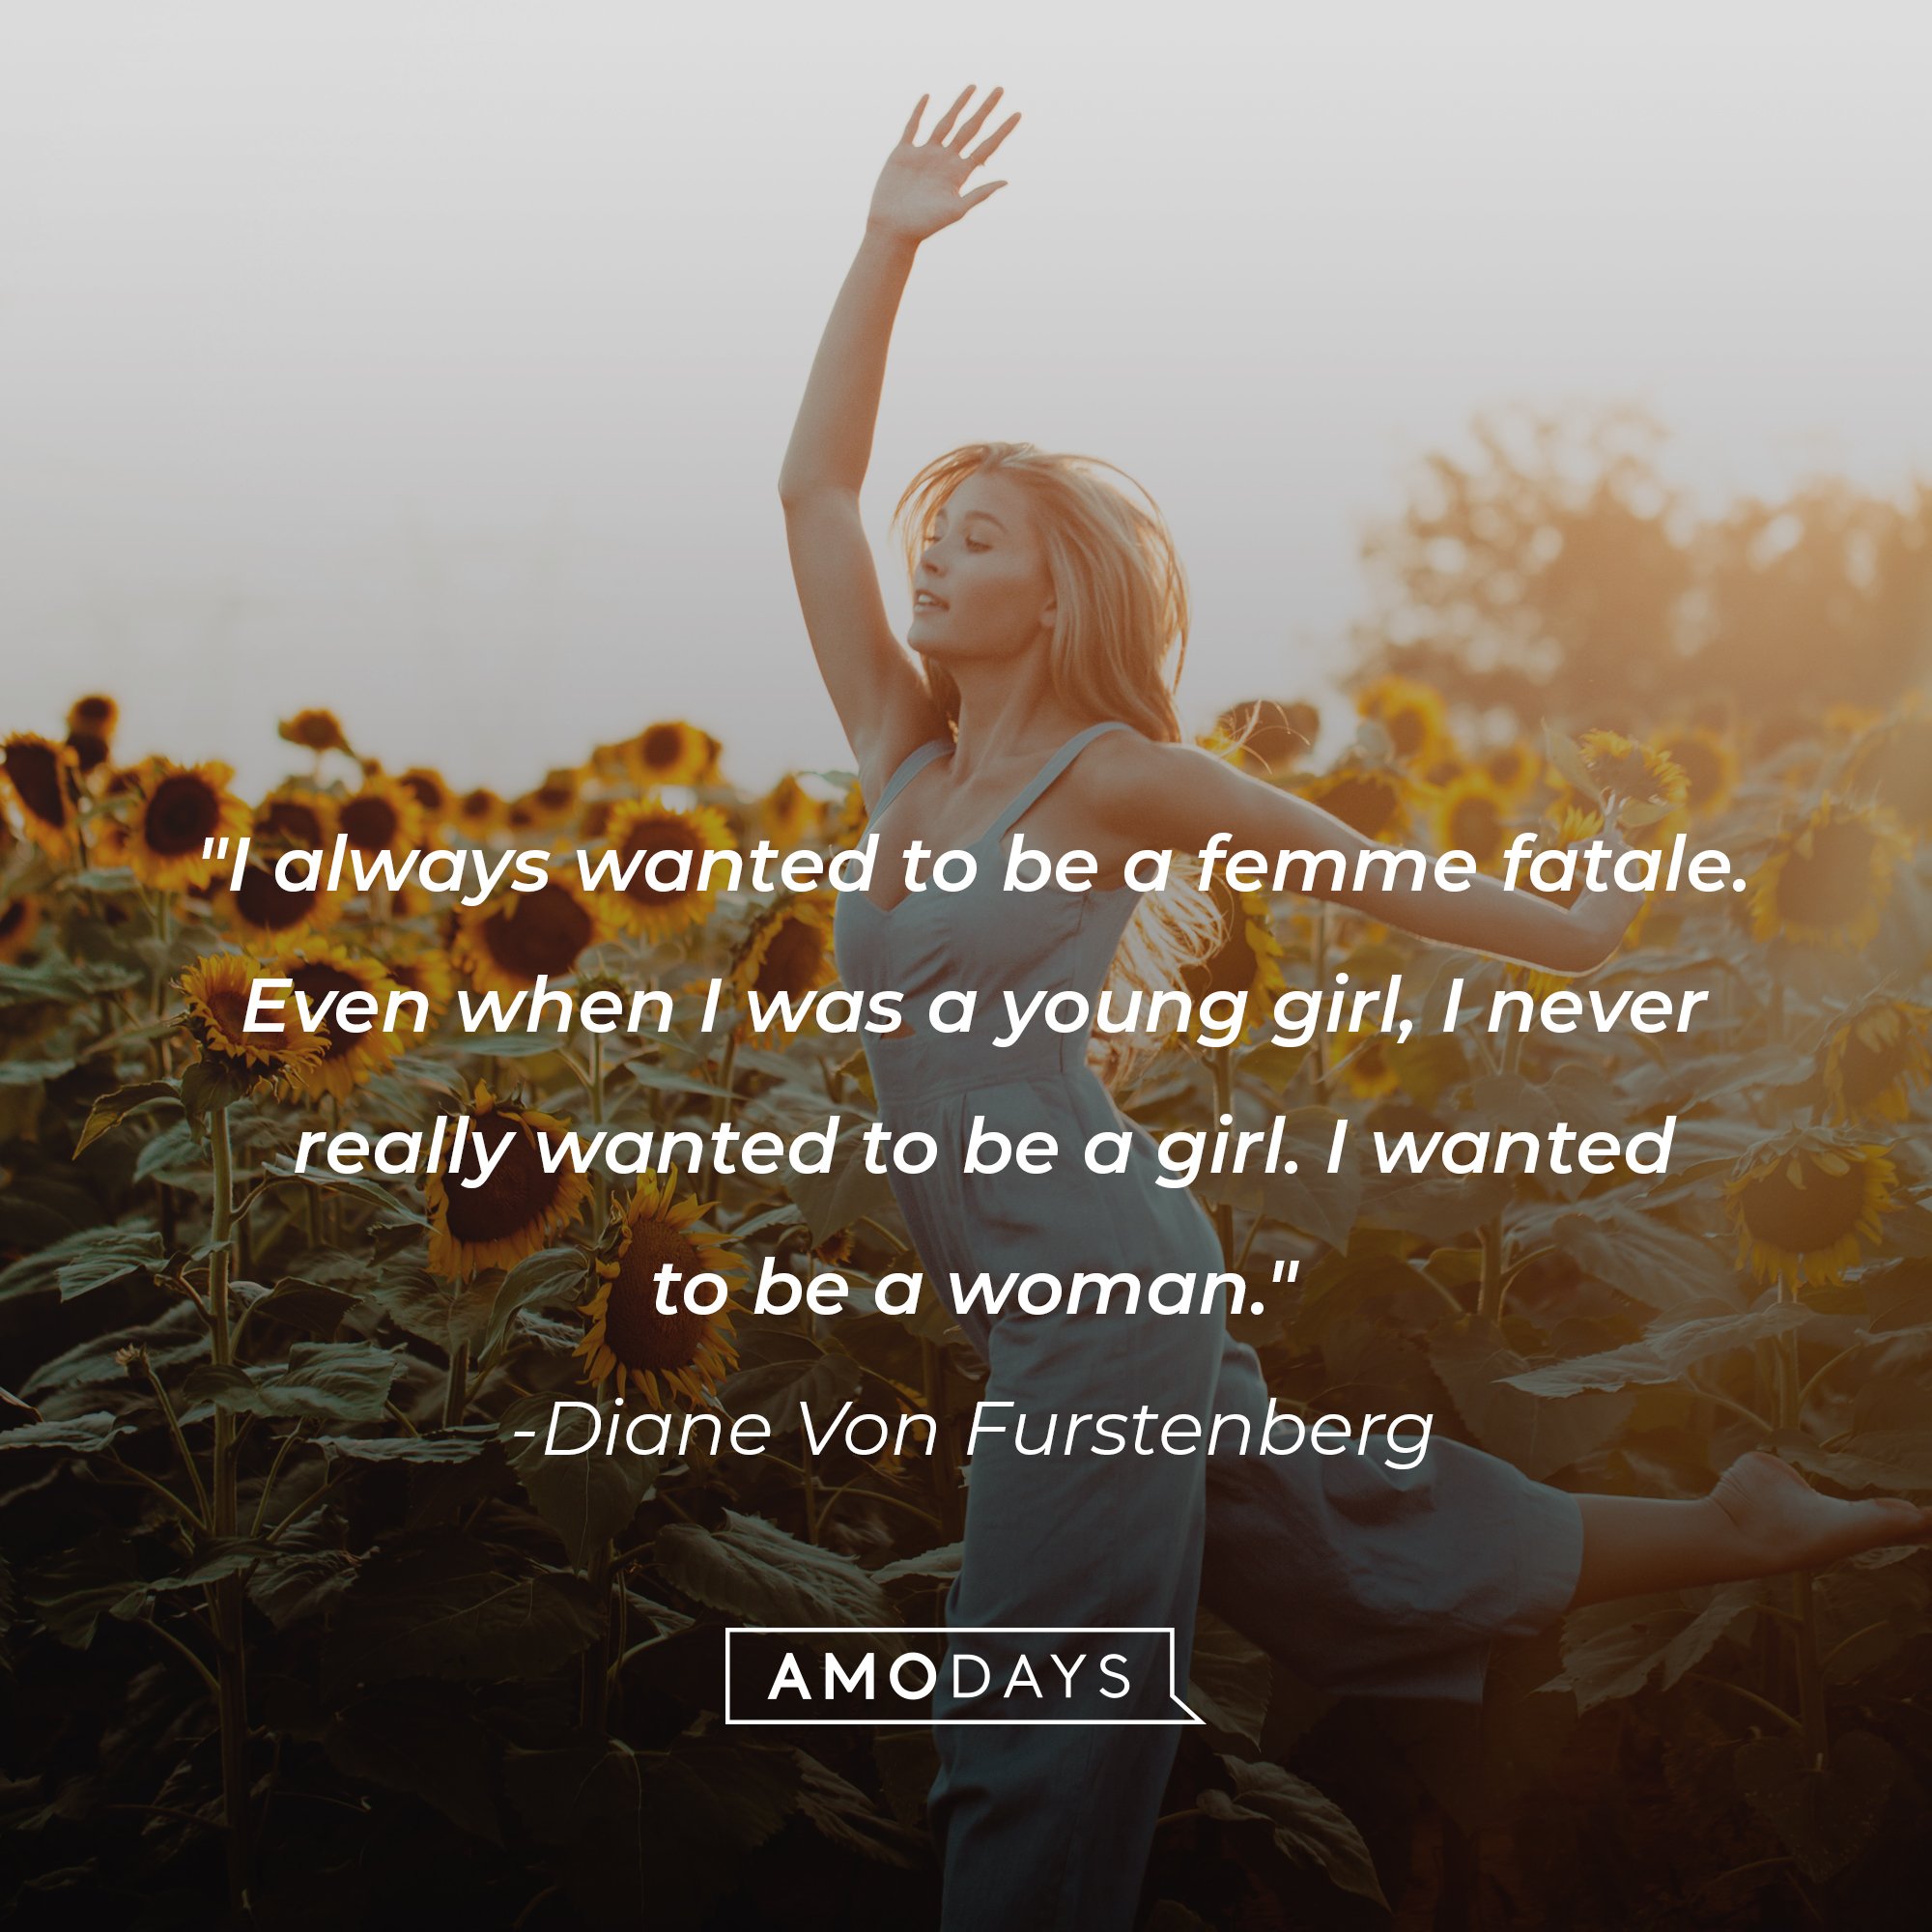 Diane Von Furstenberg’s quote: "I always wanted to be a femme fatale. Even when I was a young girl, I never really wanted to be a girl. I wanted to be a woman." | Image: AmoDays